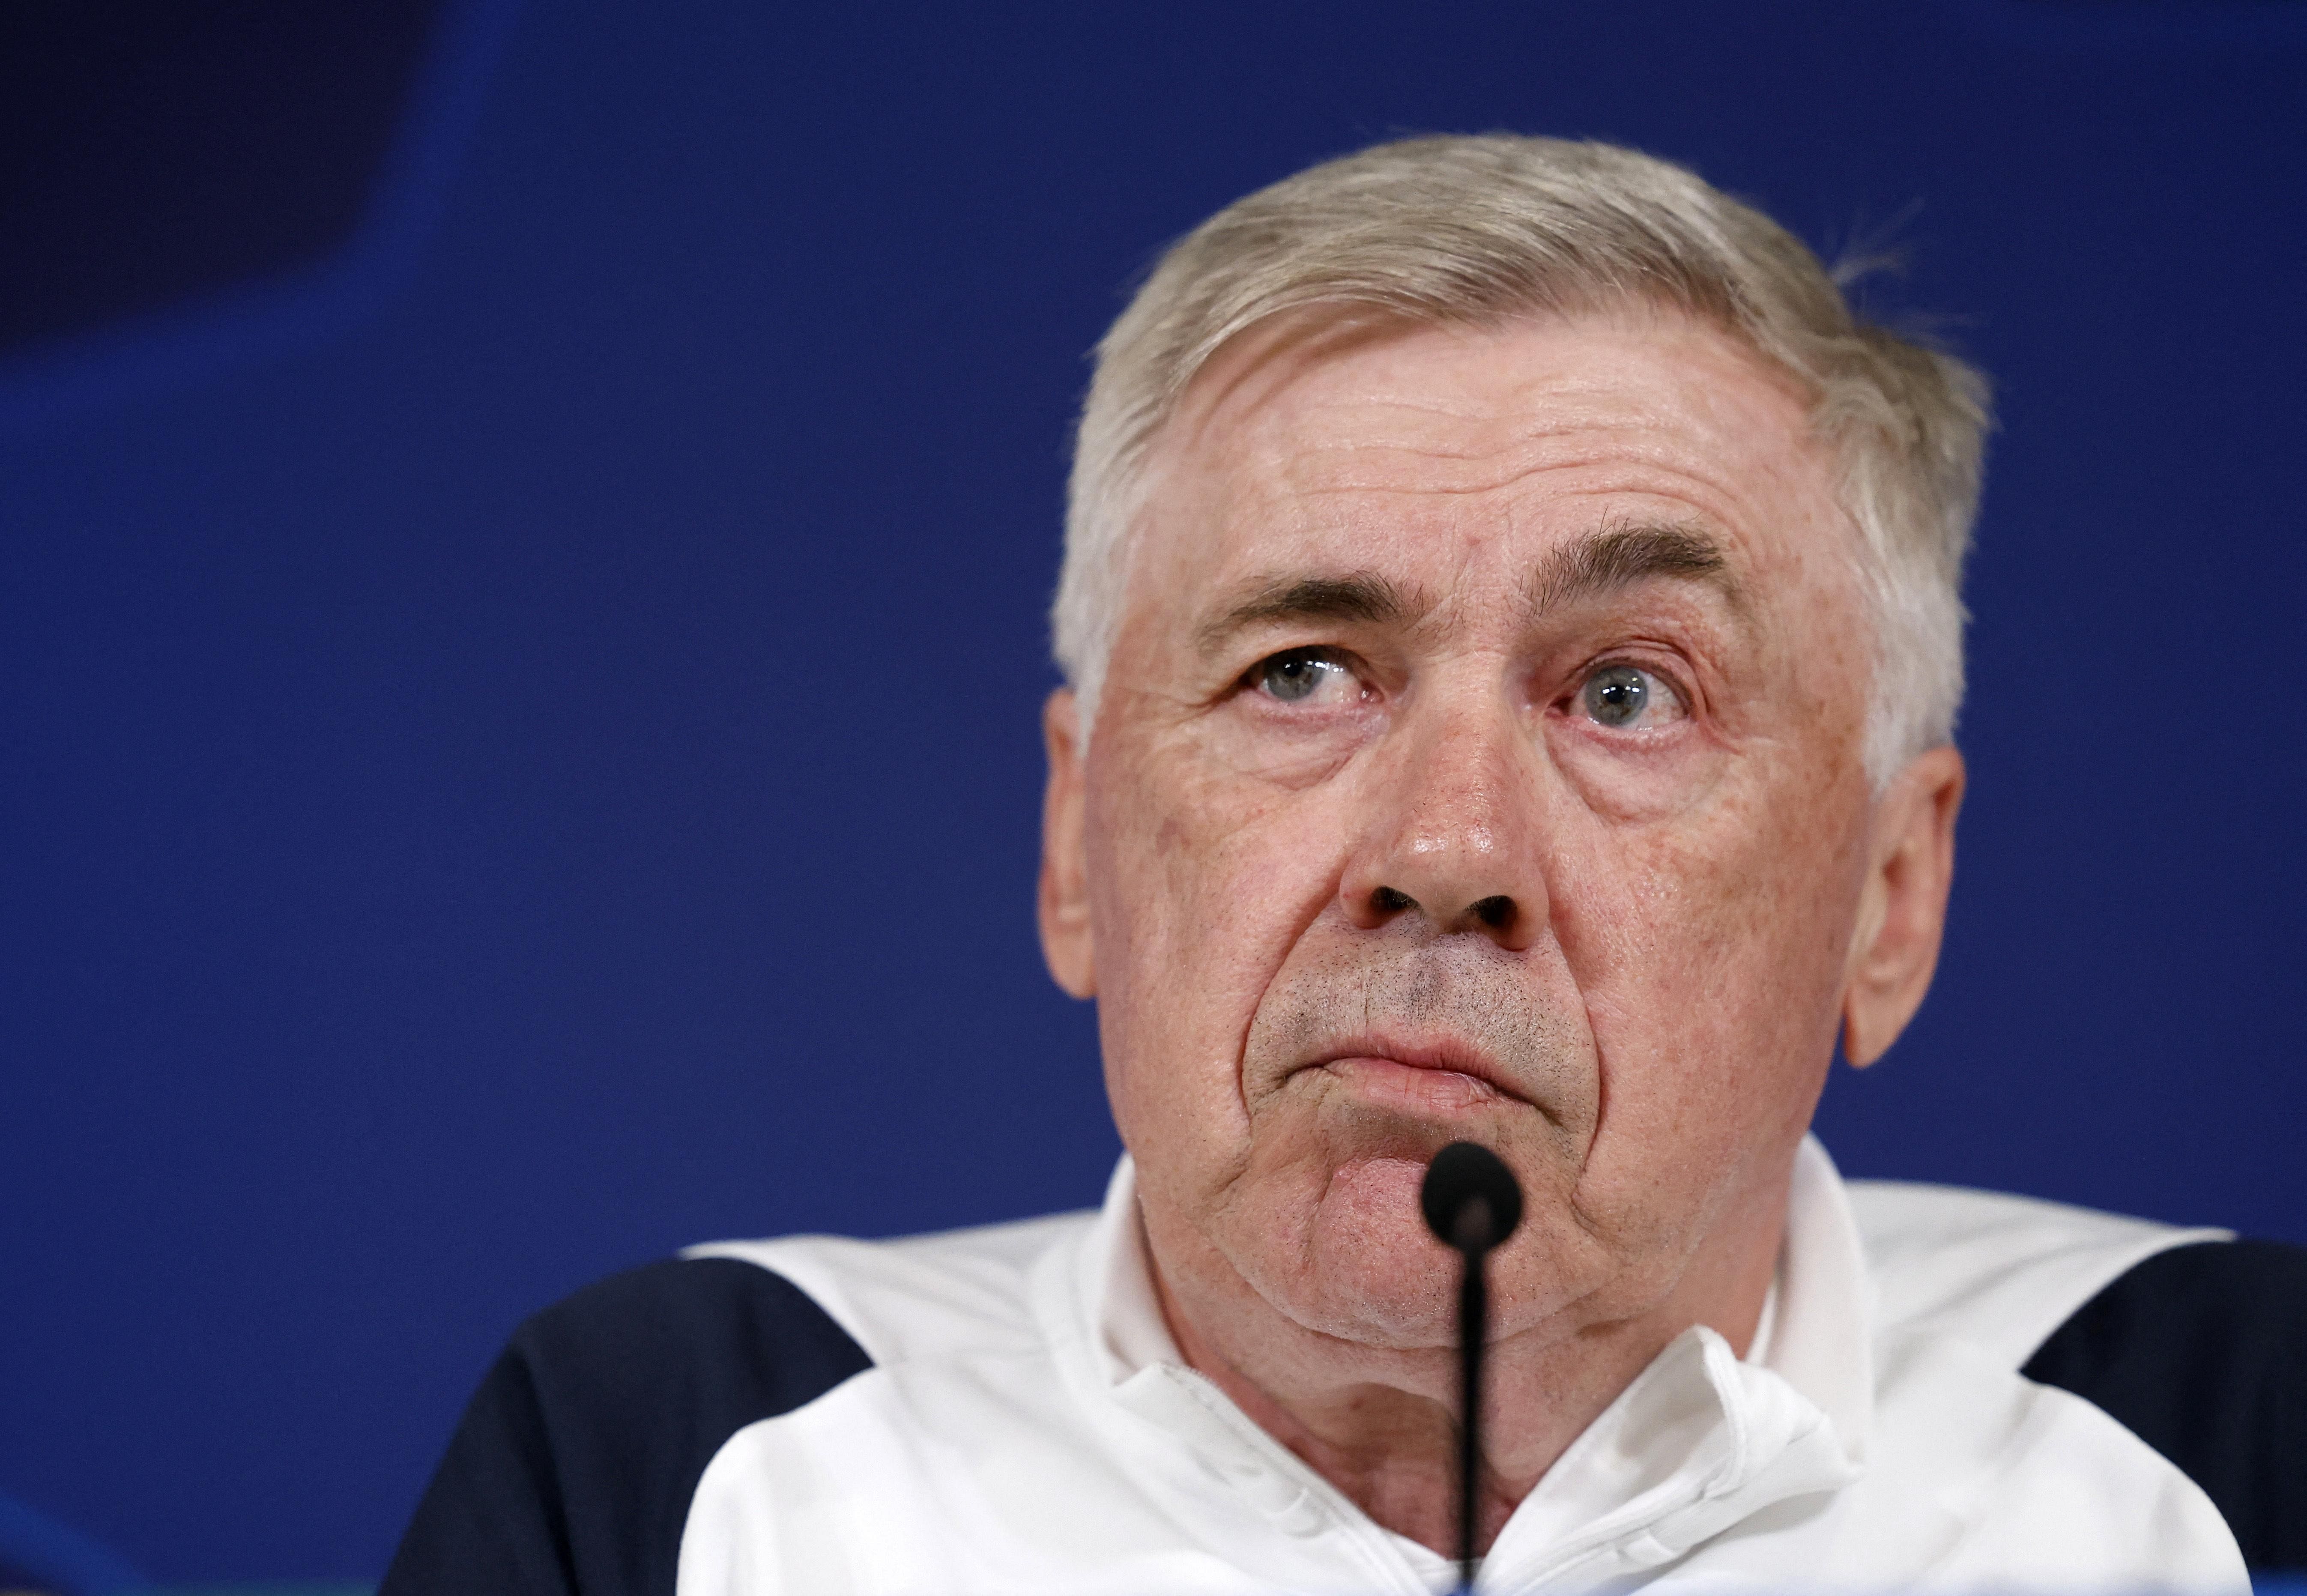 Real Madrid ‘lacked courage’ against Manchester City, says Carlo Ancelotti before rematch